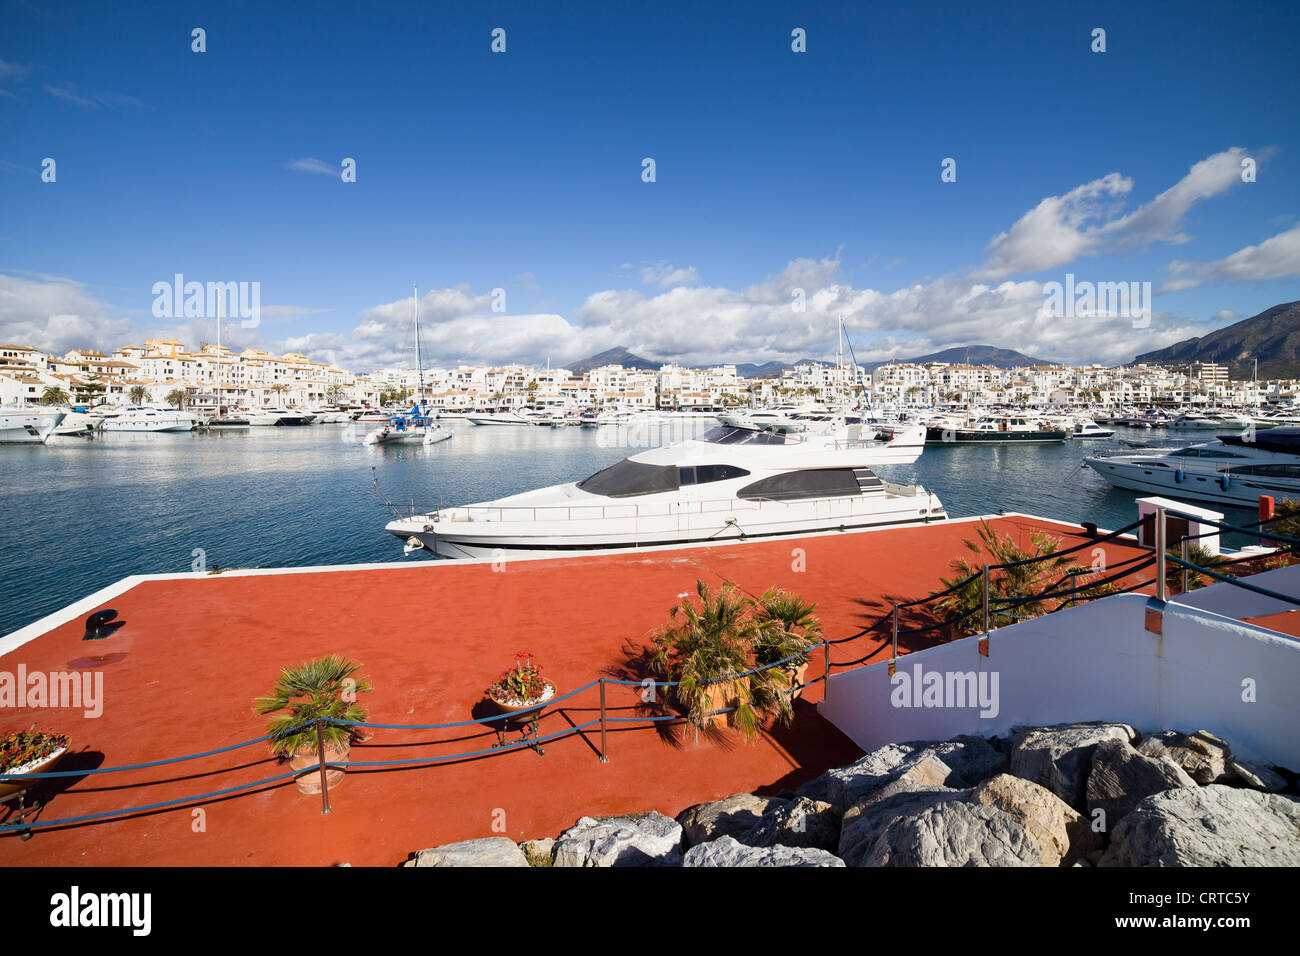 Motorboats and yachts marina in luxury resort of Puerto Banus on Costa del Sol, Andalucia, Spain. Stock Photo